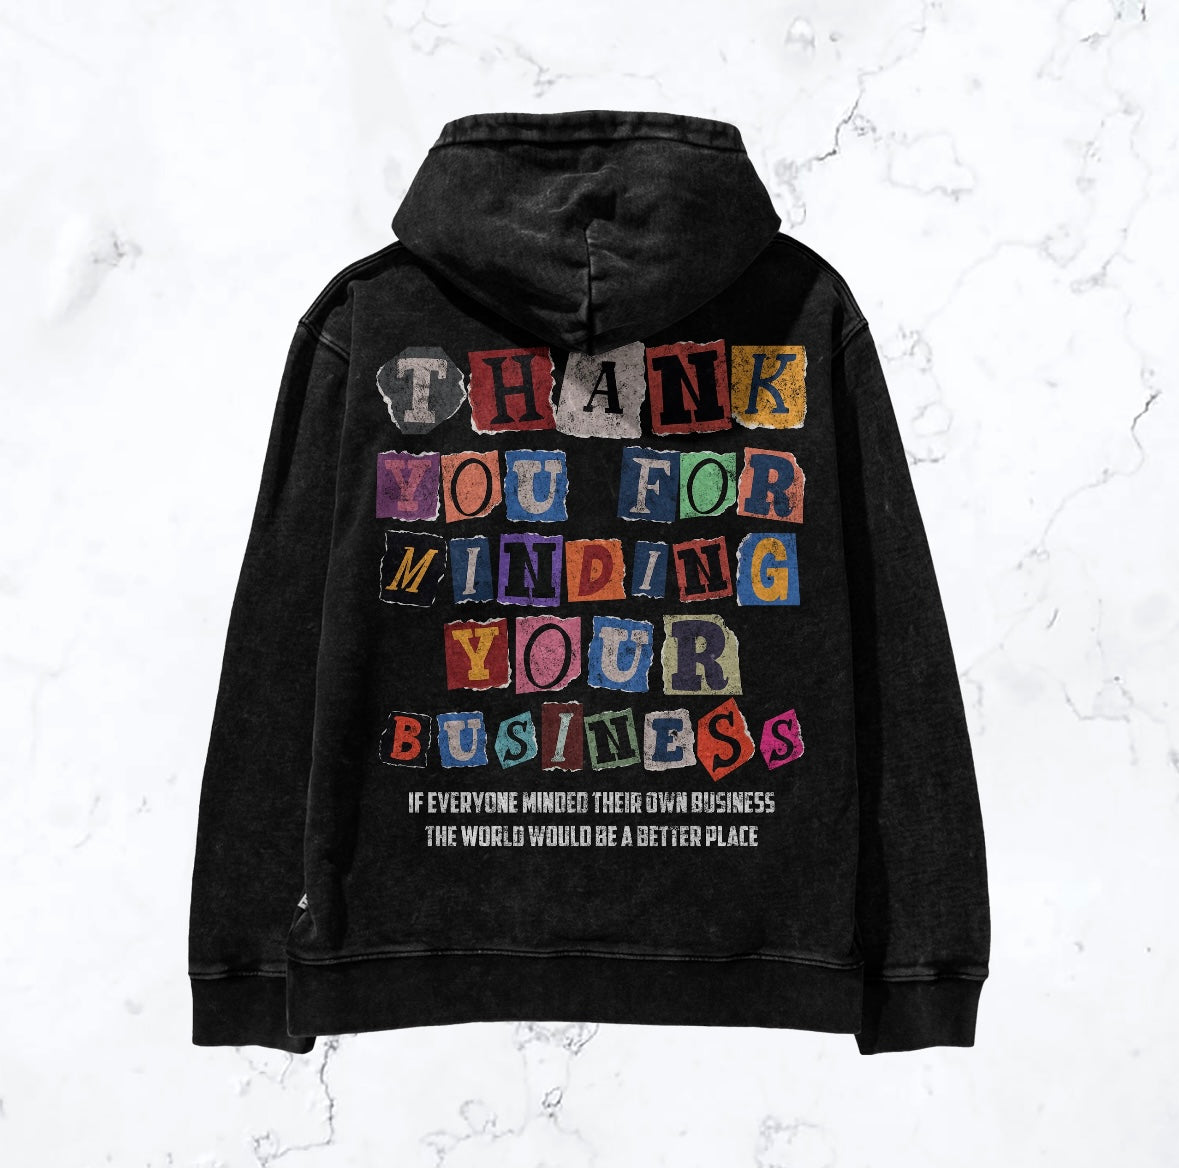 Broken Society “Mind Your Business” Hoodie